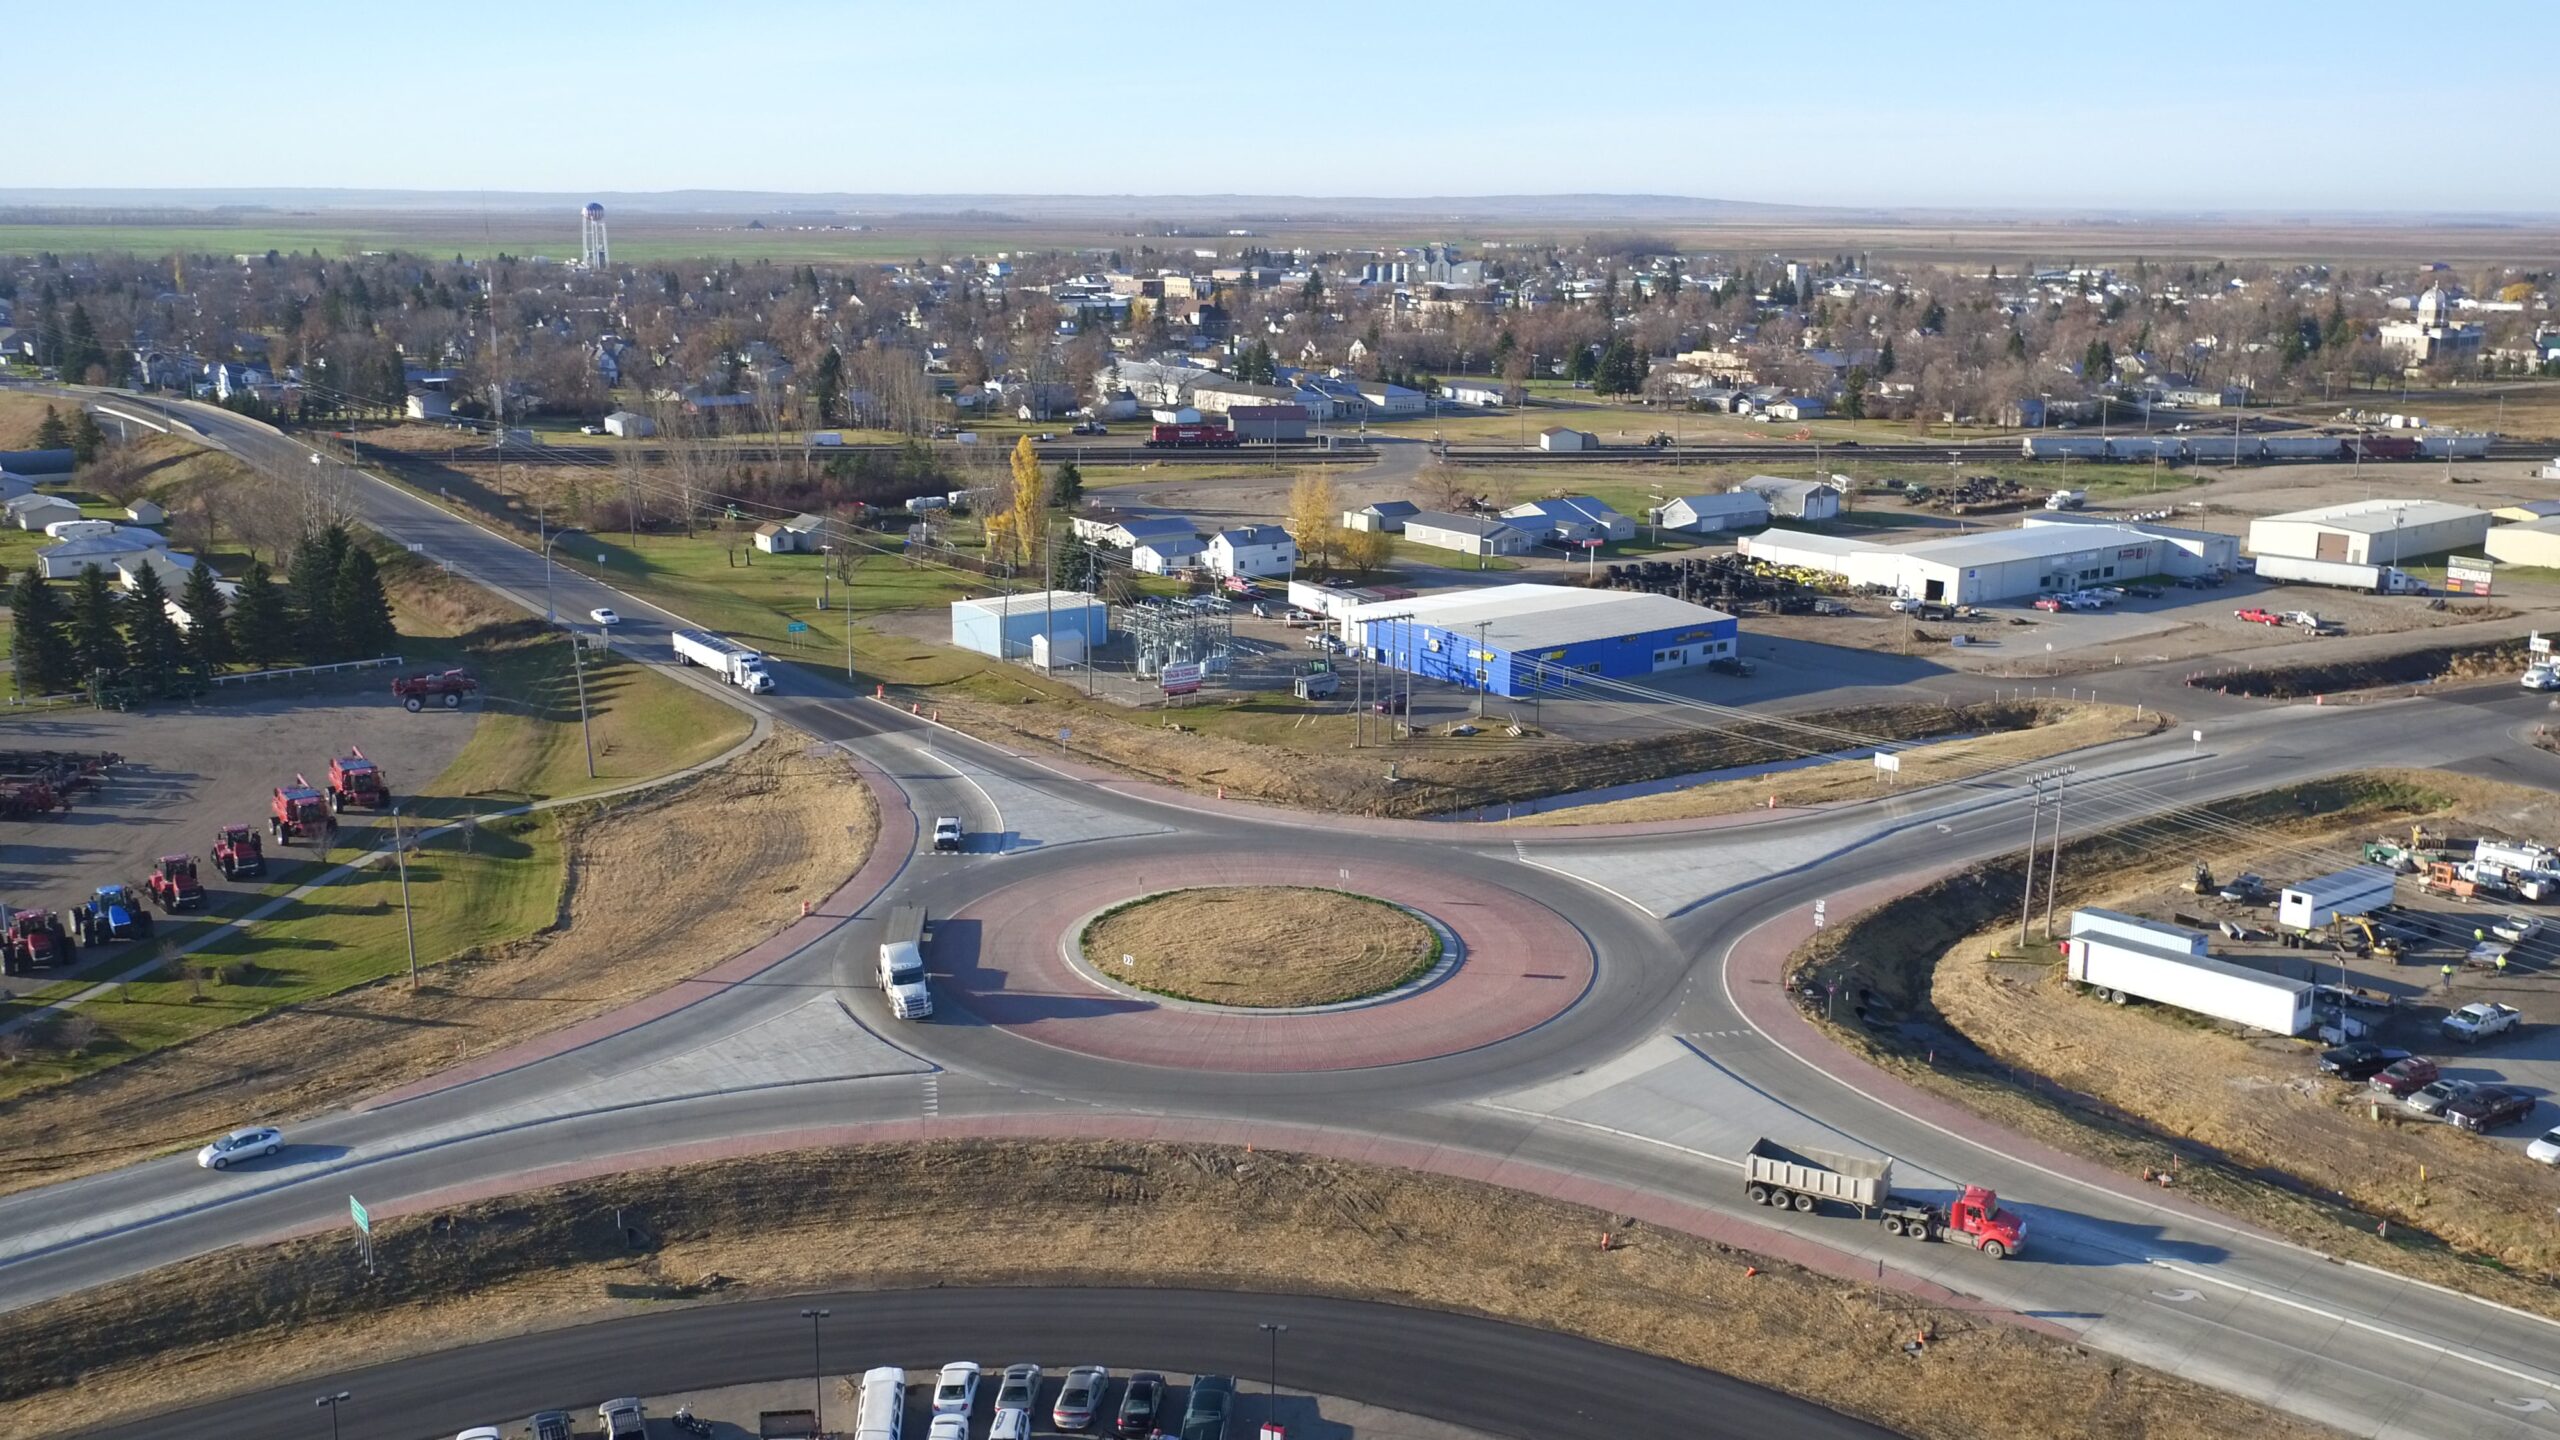 view of large roundabout from the air